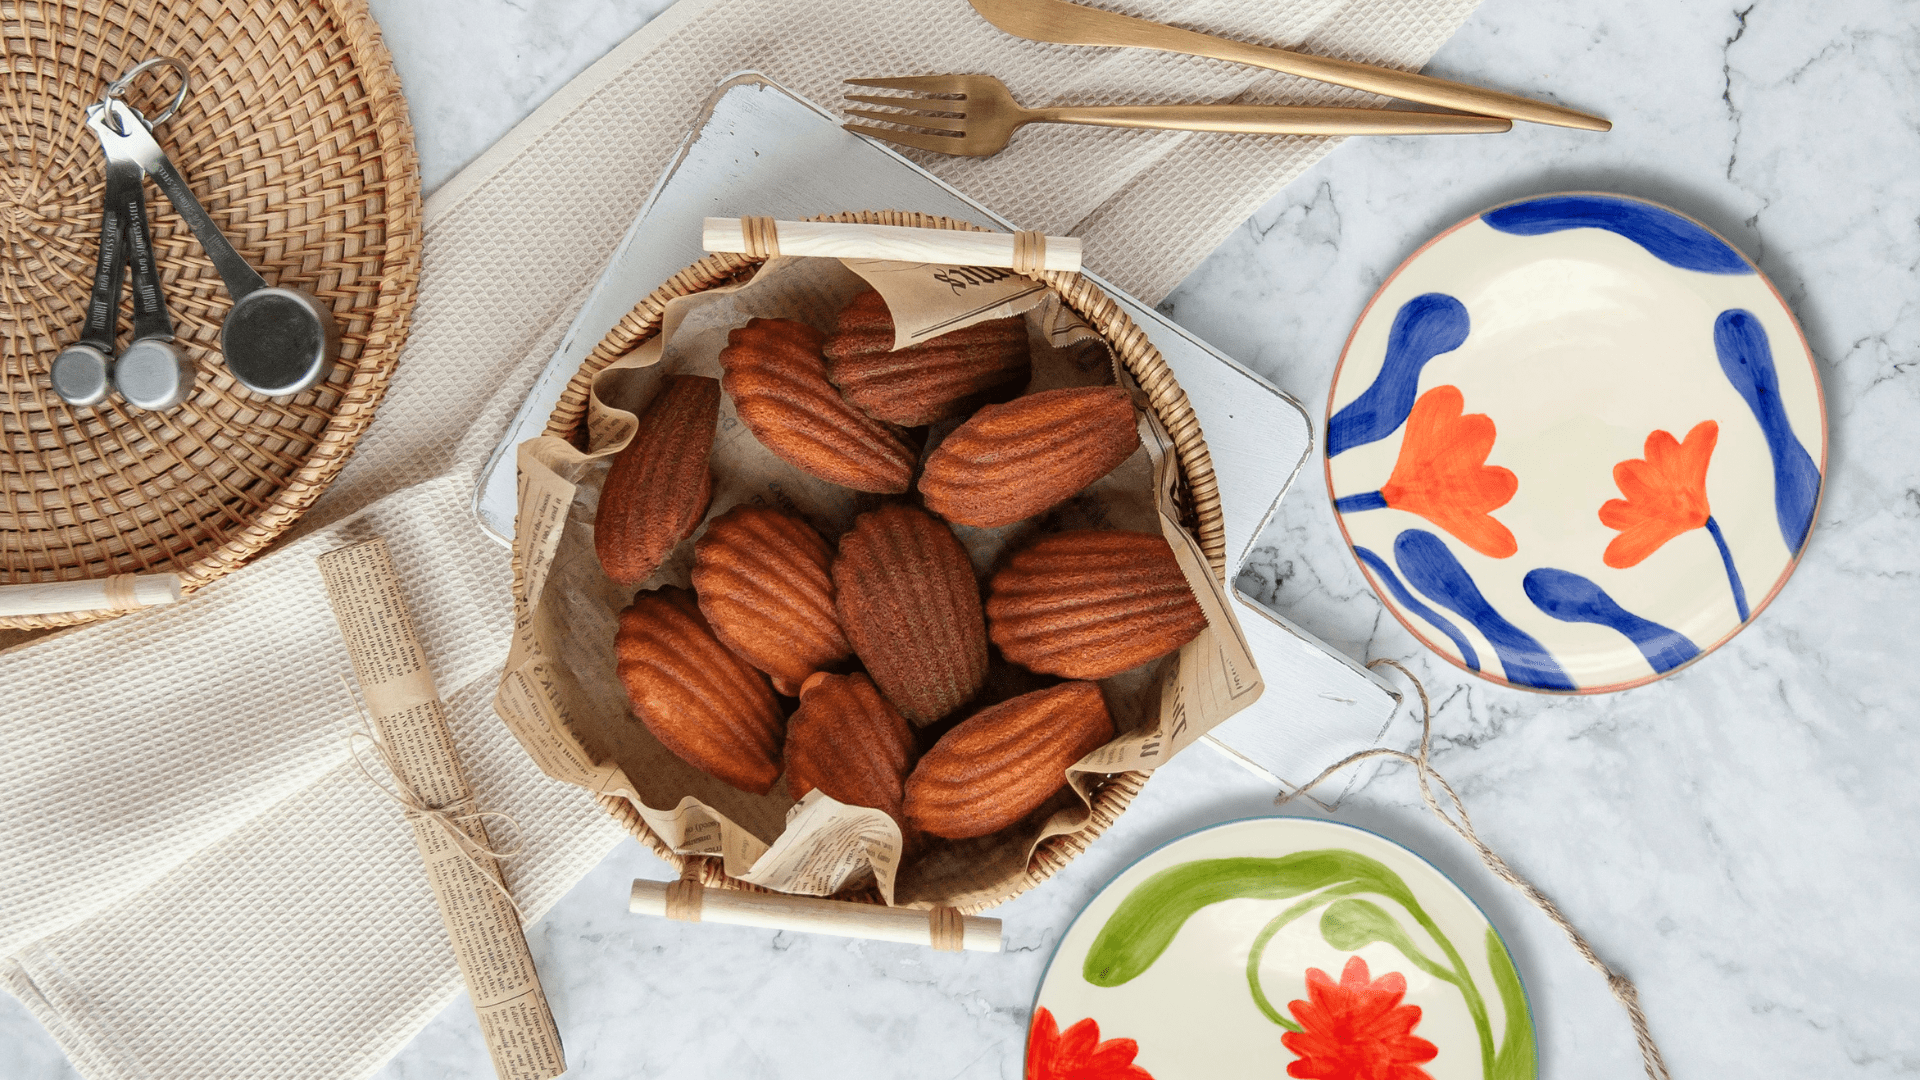 François Perret's Madeleines Recipe (Ritz): A Colourful Delight on Our Small Flower Plates